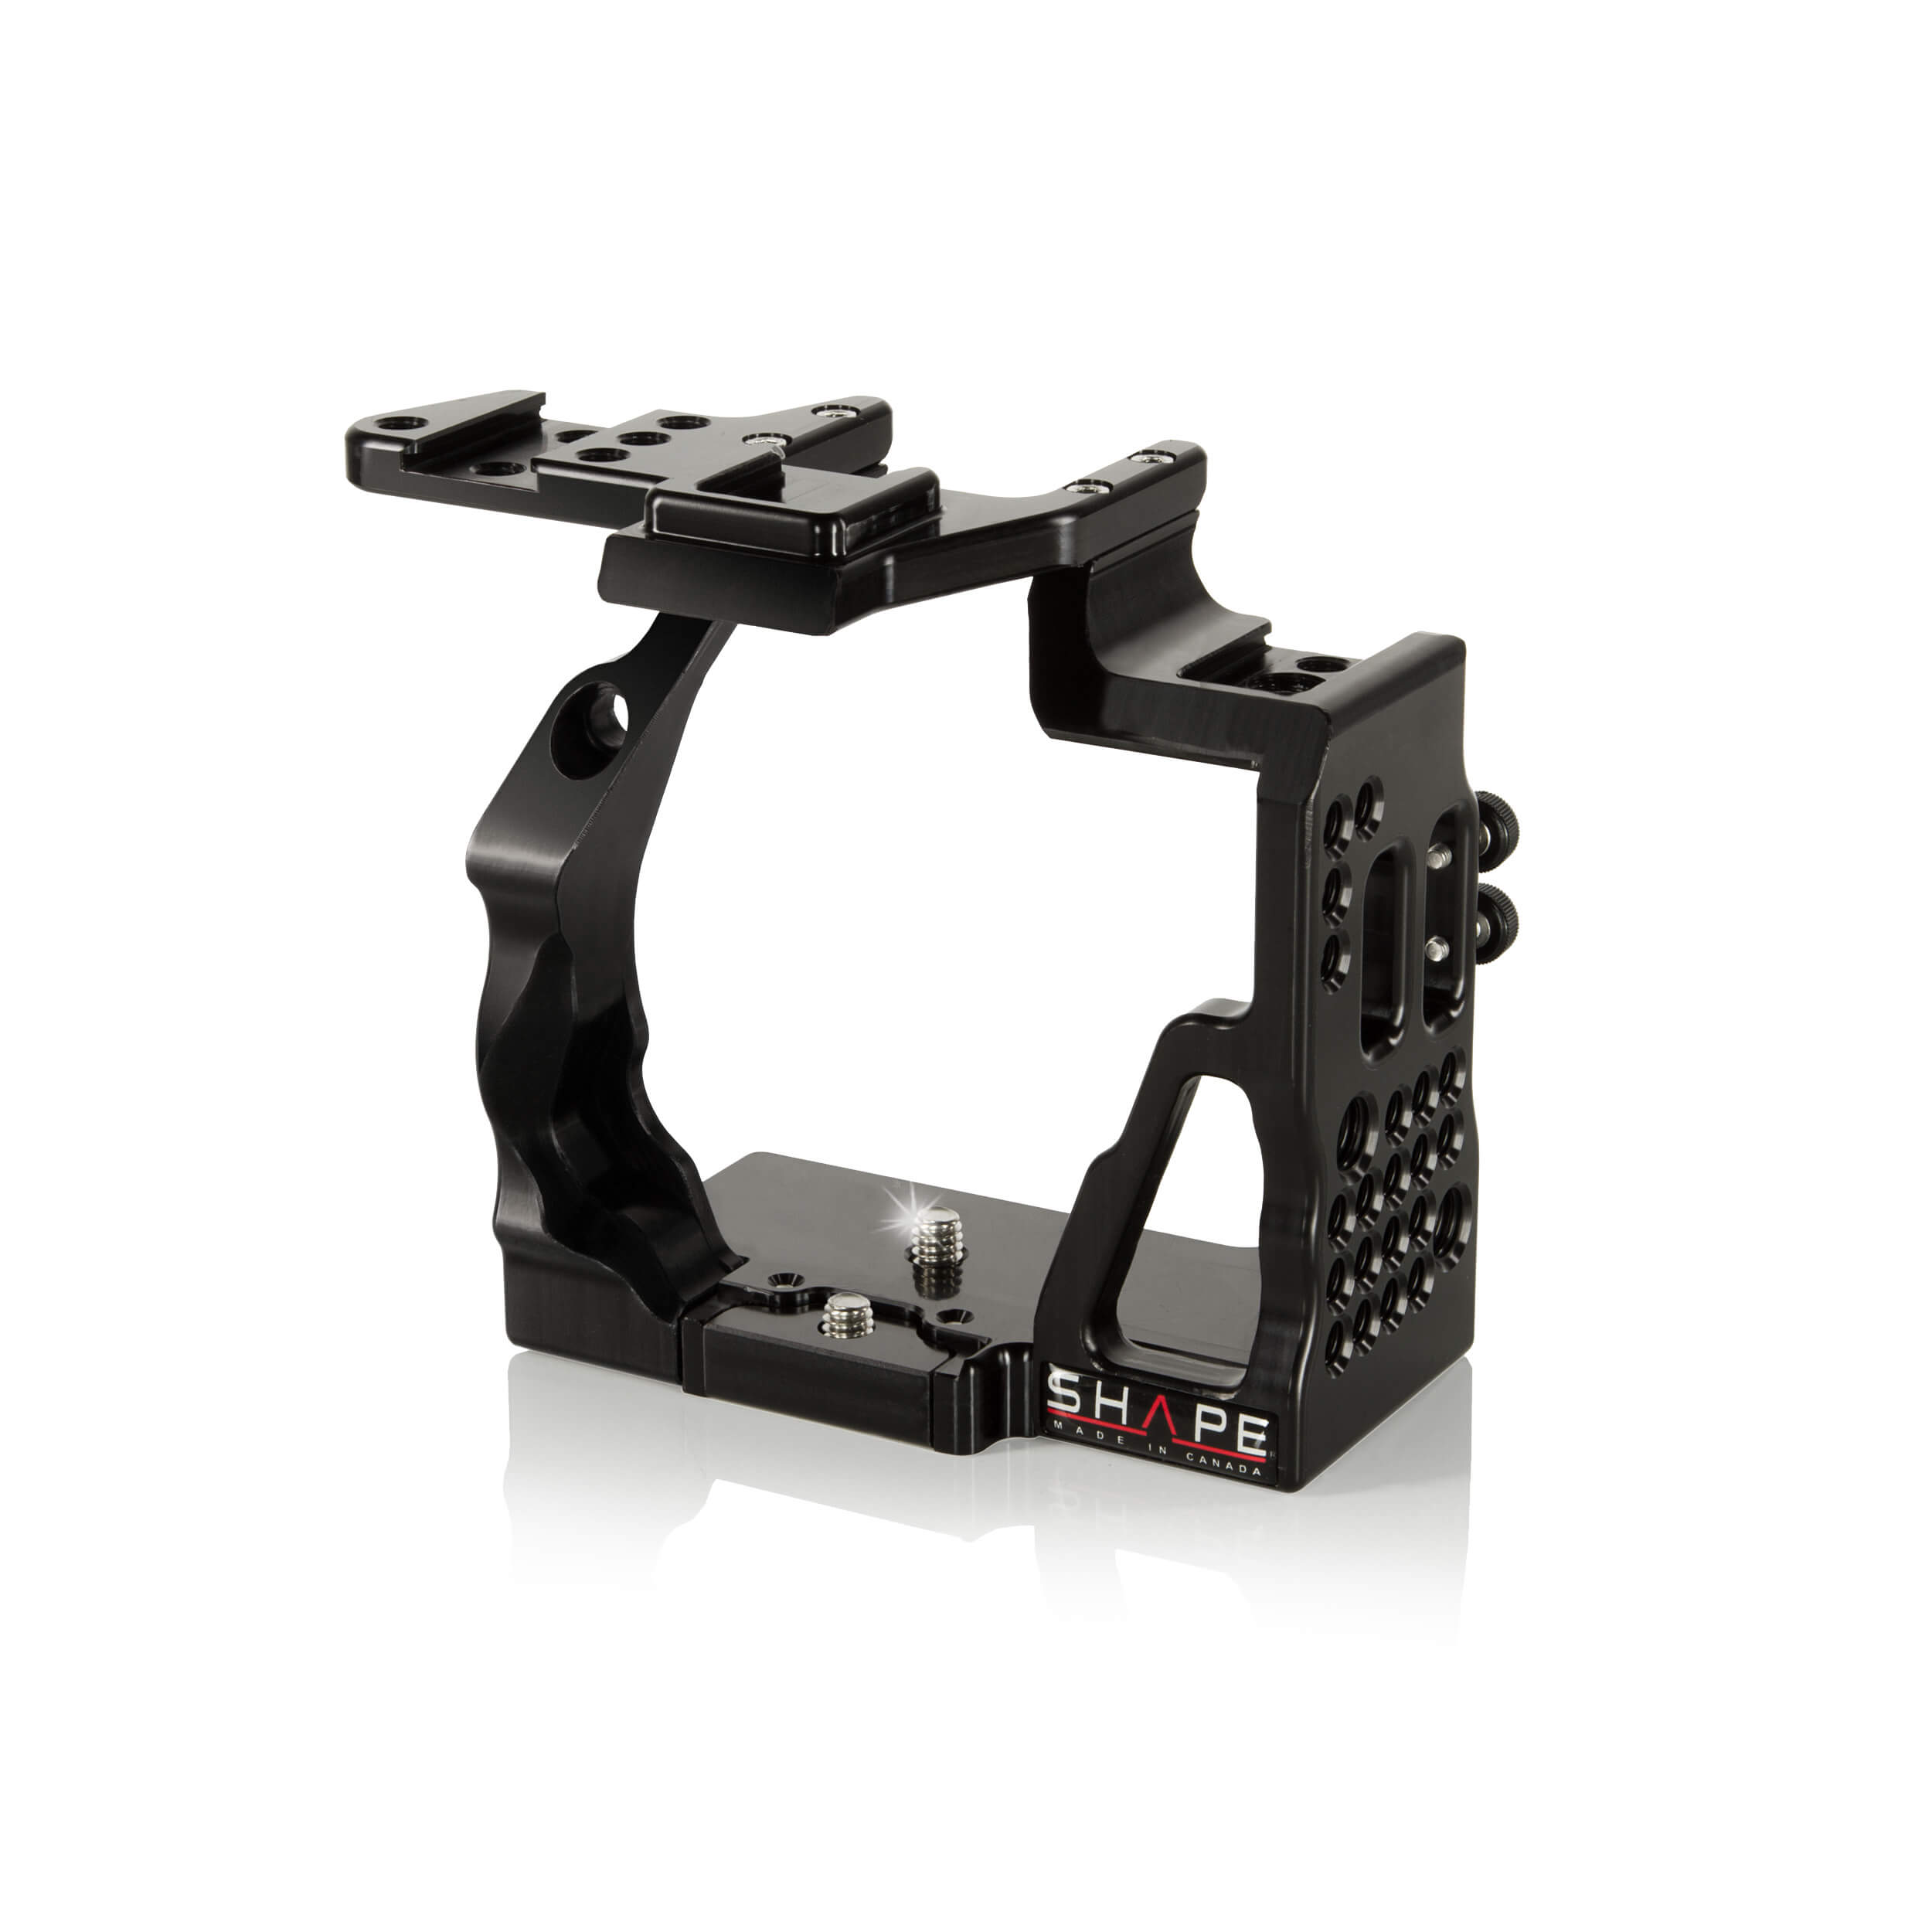 SHAPE Cage with Offset Shoulder Mount System for Sony a7 II, a7S II, & a7R II